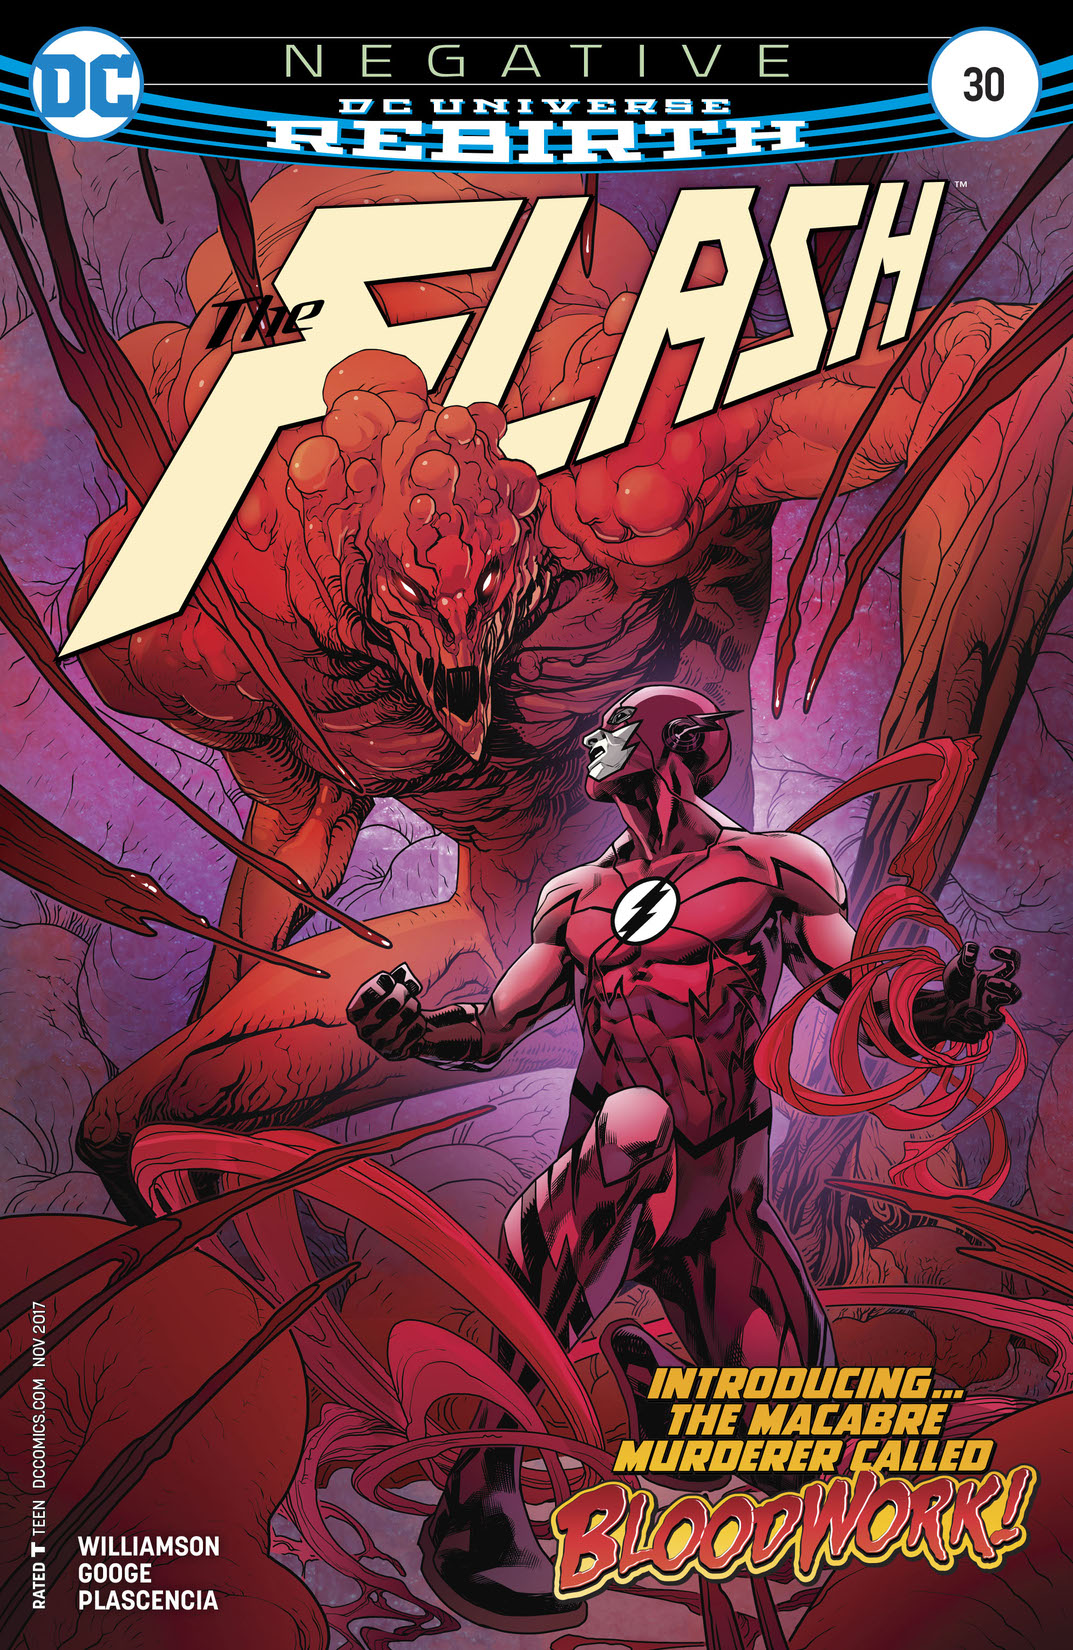 The Flash (2016-) #30 preview images